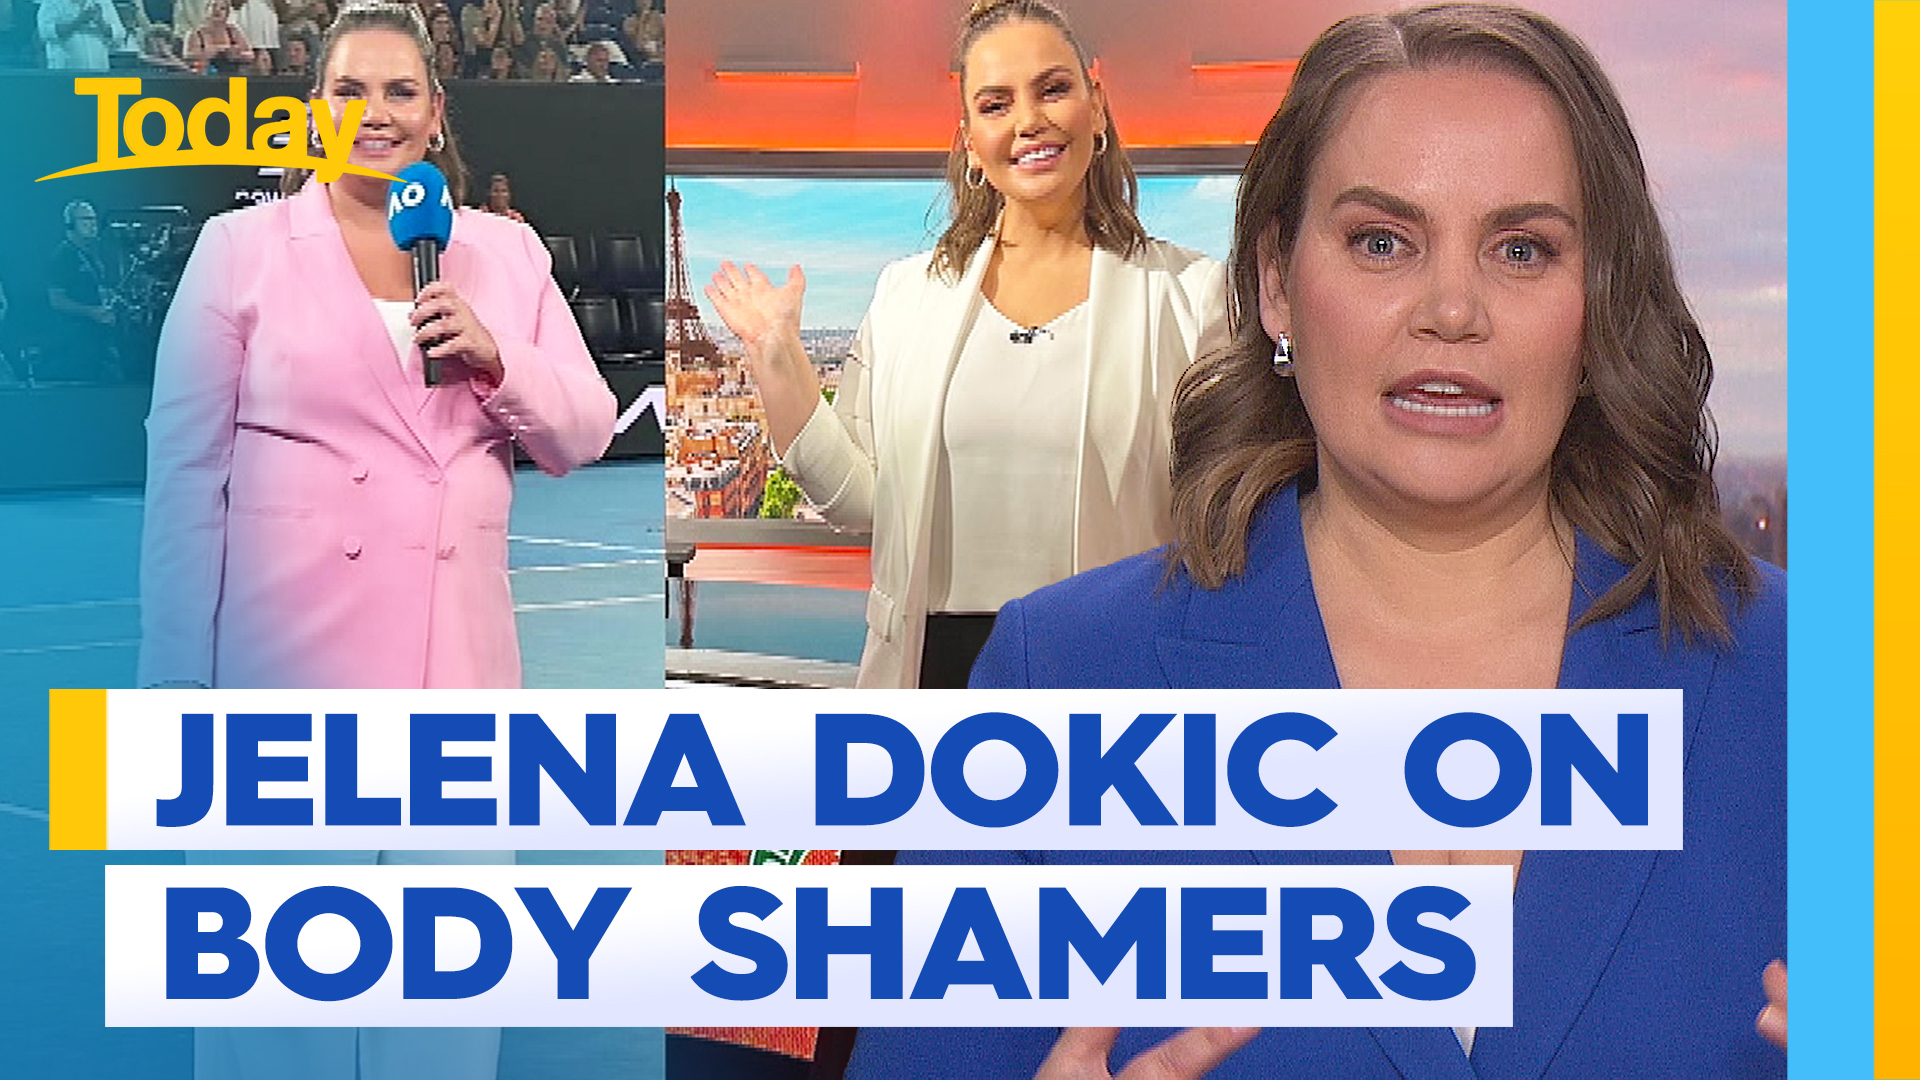 Jelena Dokic's blunt message to weight loss critics